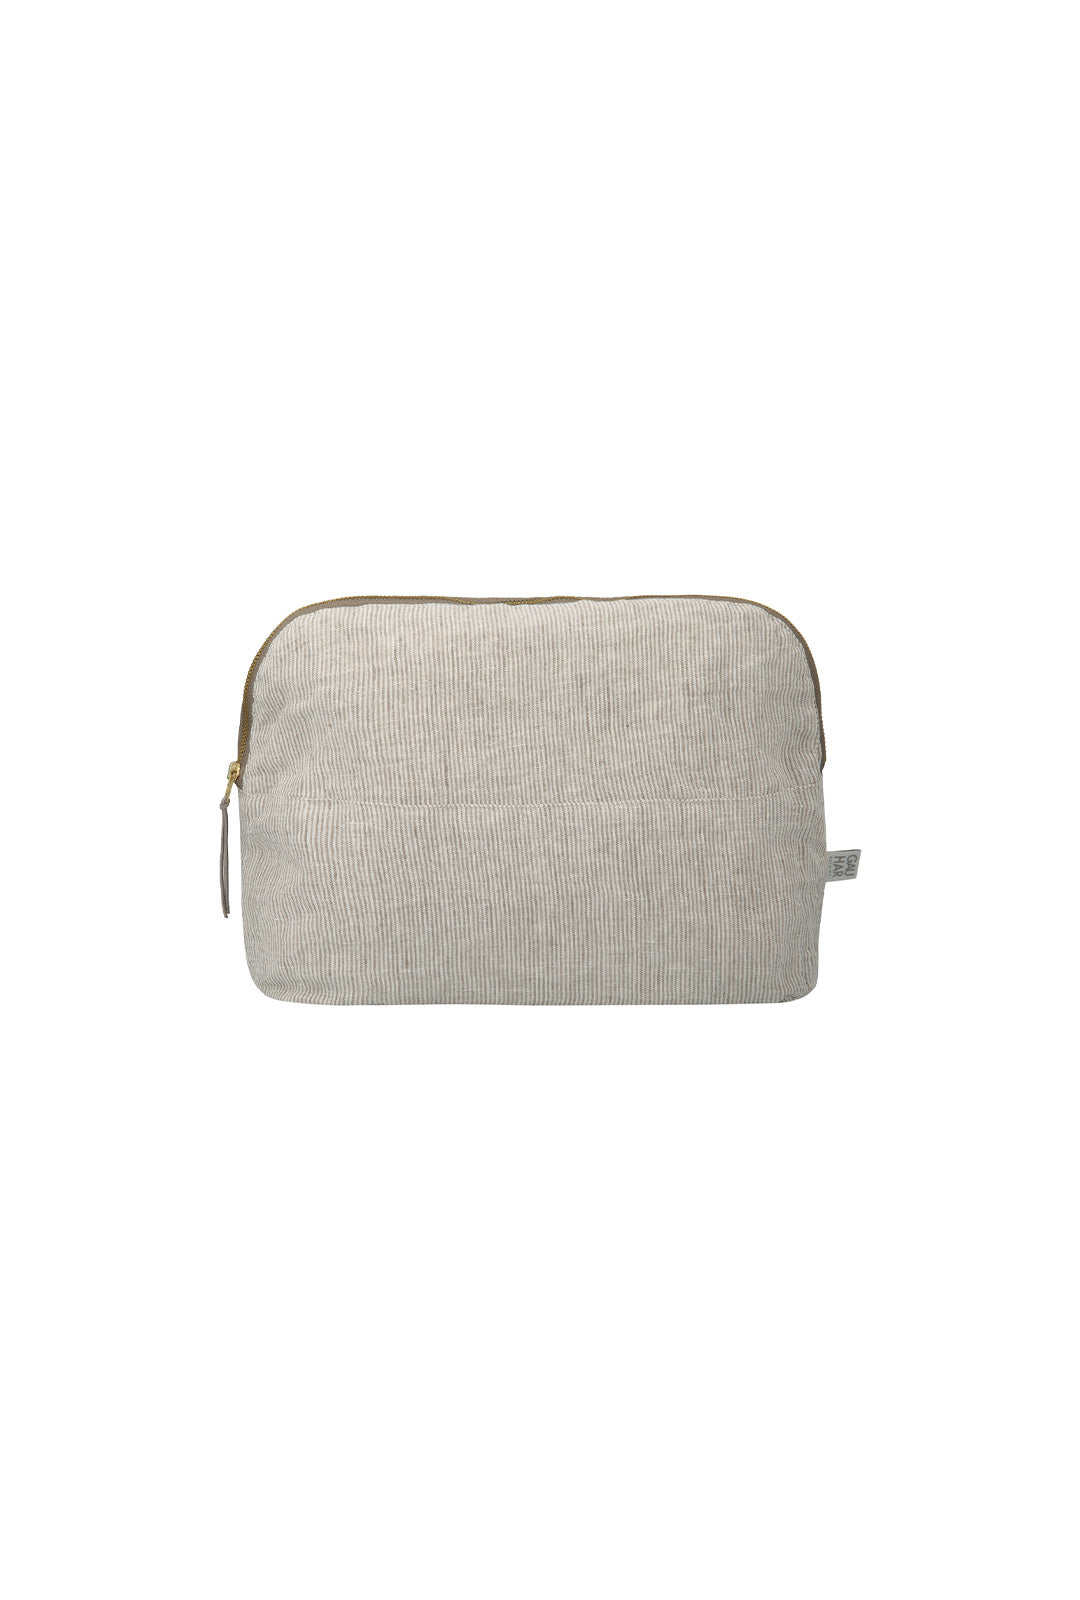 COSMETIC BAG LINEN STRIPED BEIGE LARGE